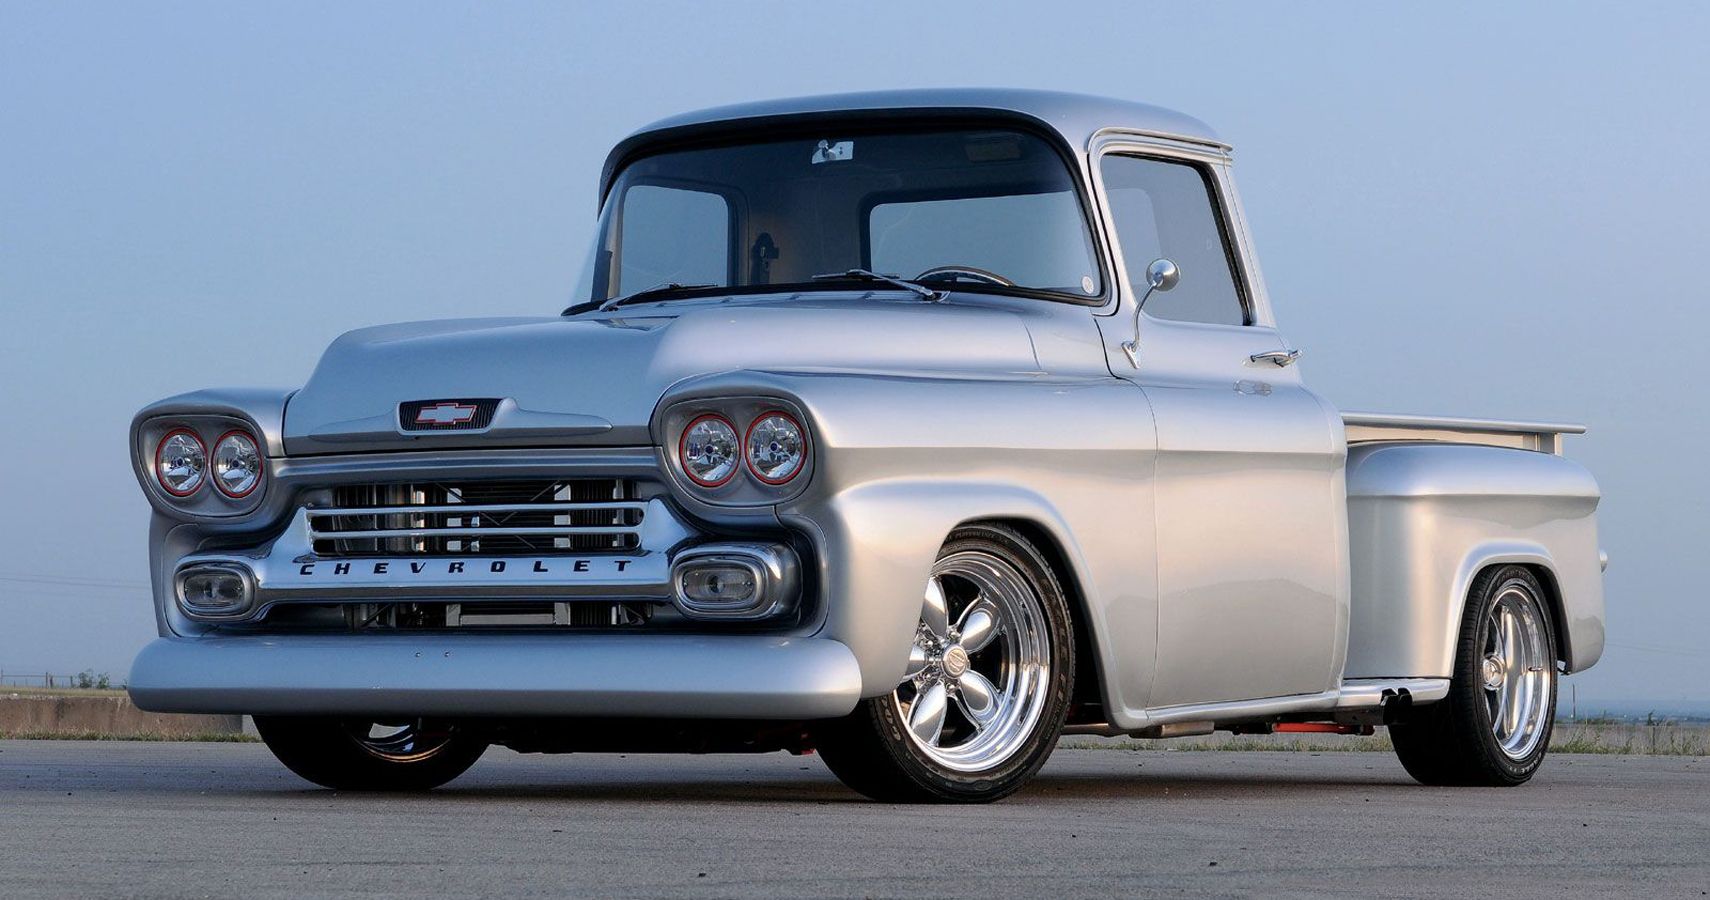 This Little Truck, Chevy Apache, Remains A Top Of The Line And Much-Vaunted Classic